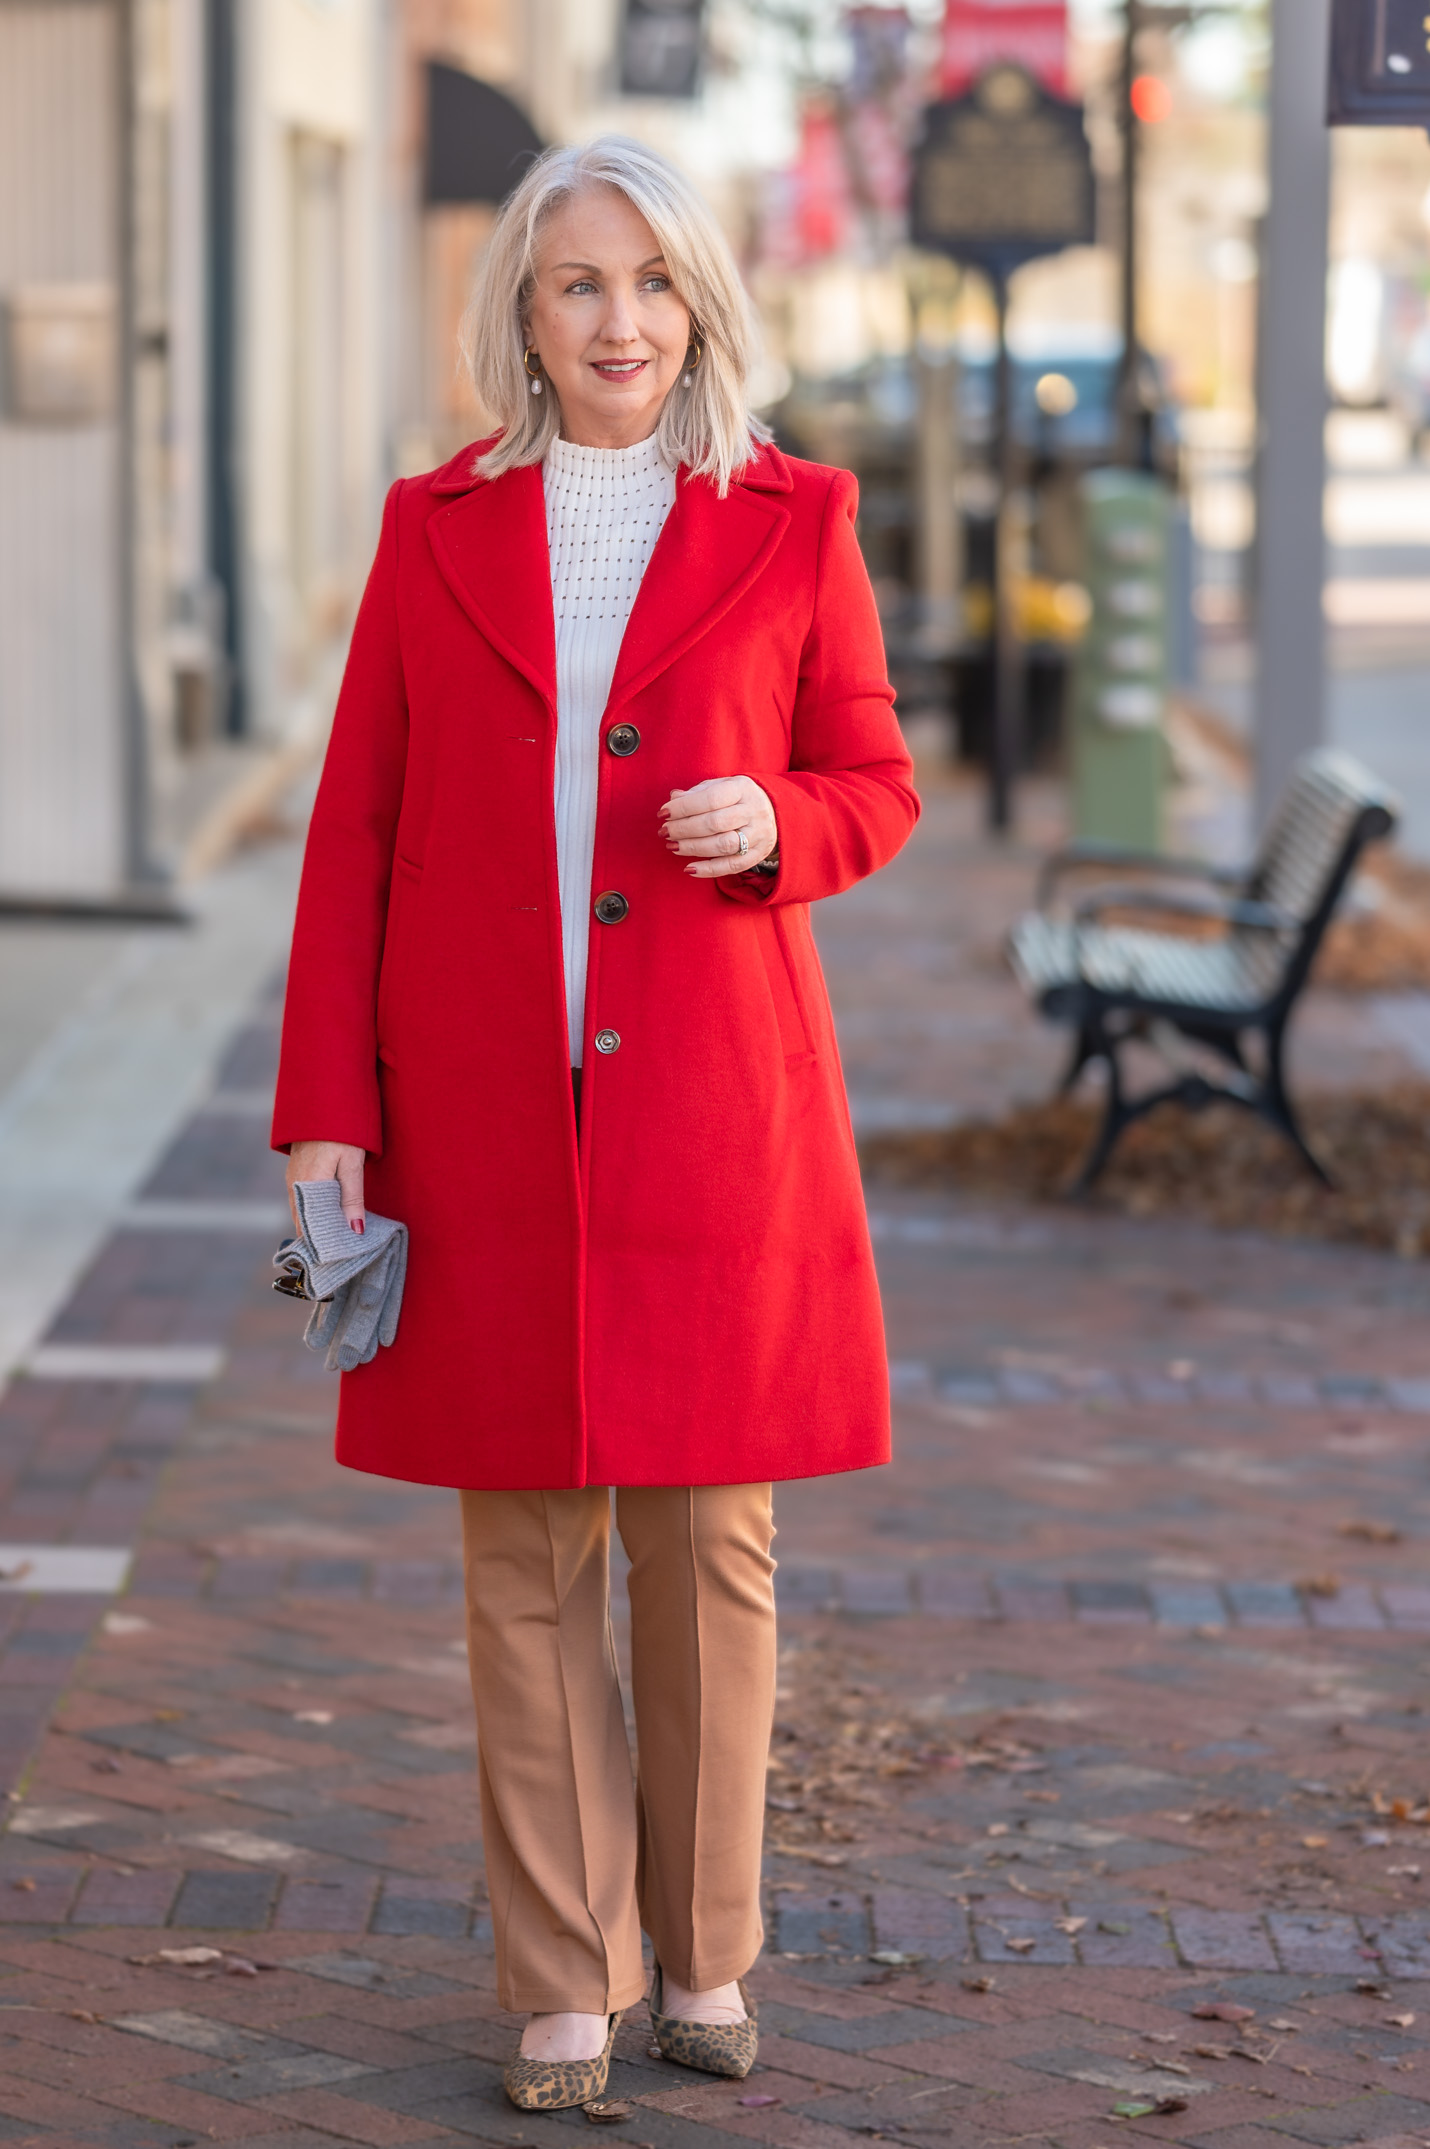 Why You Need a Colorful Coat this Winter